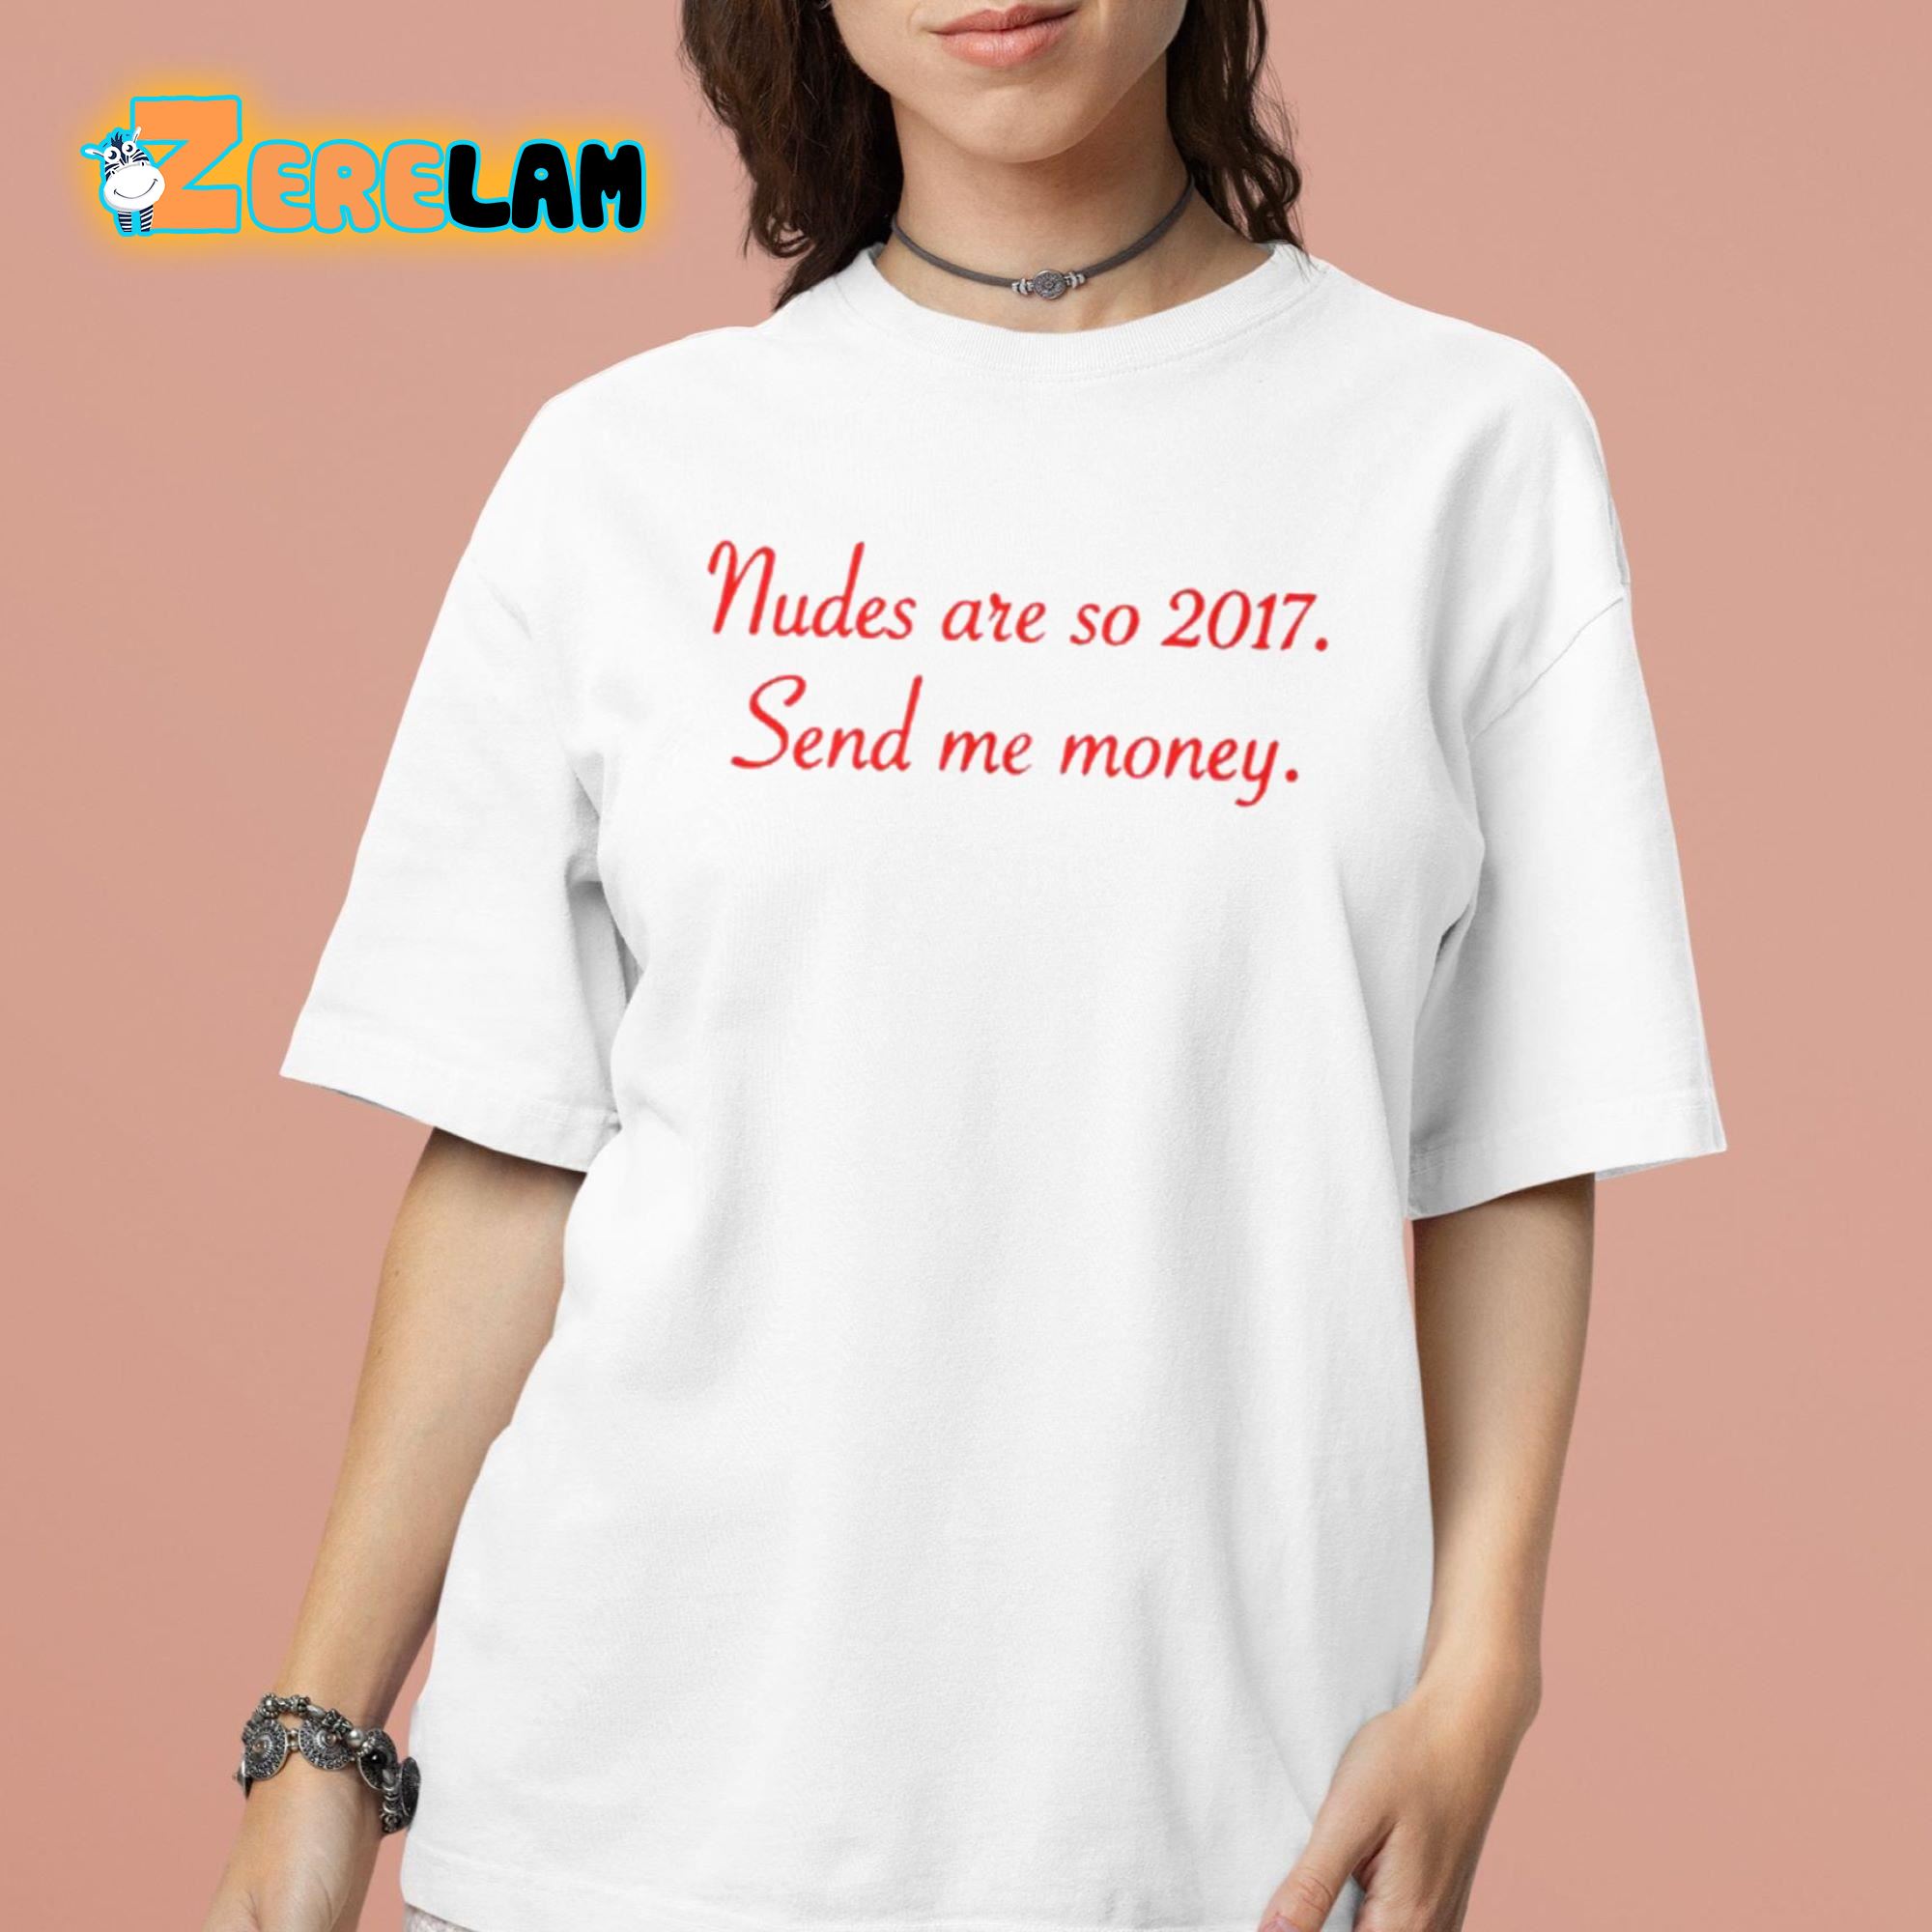 NUDES ARE SO 2017 - Nudes Are So 2017 Send Me Money - T-Shirt